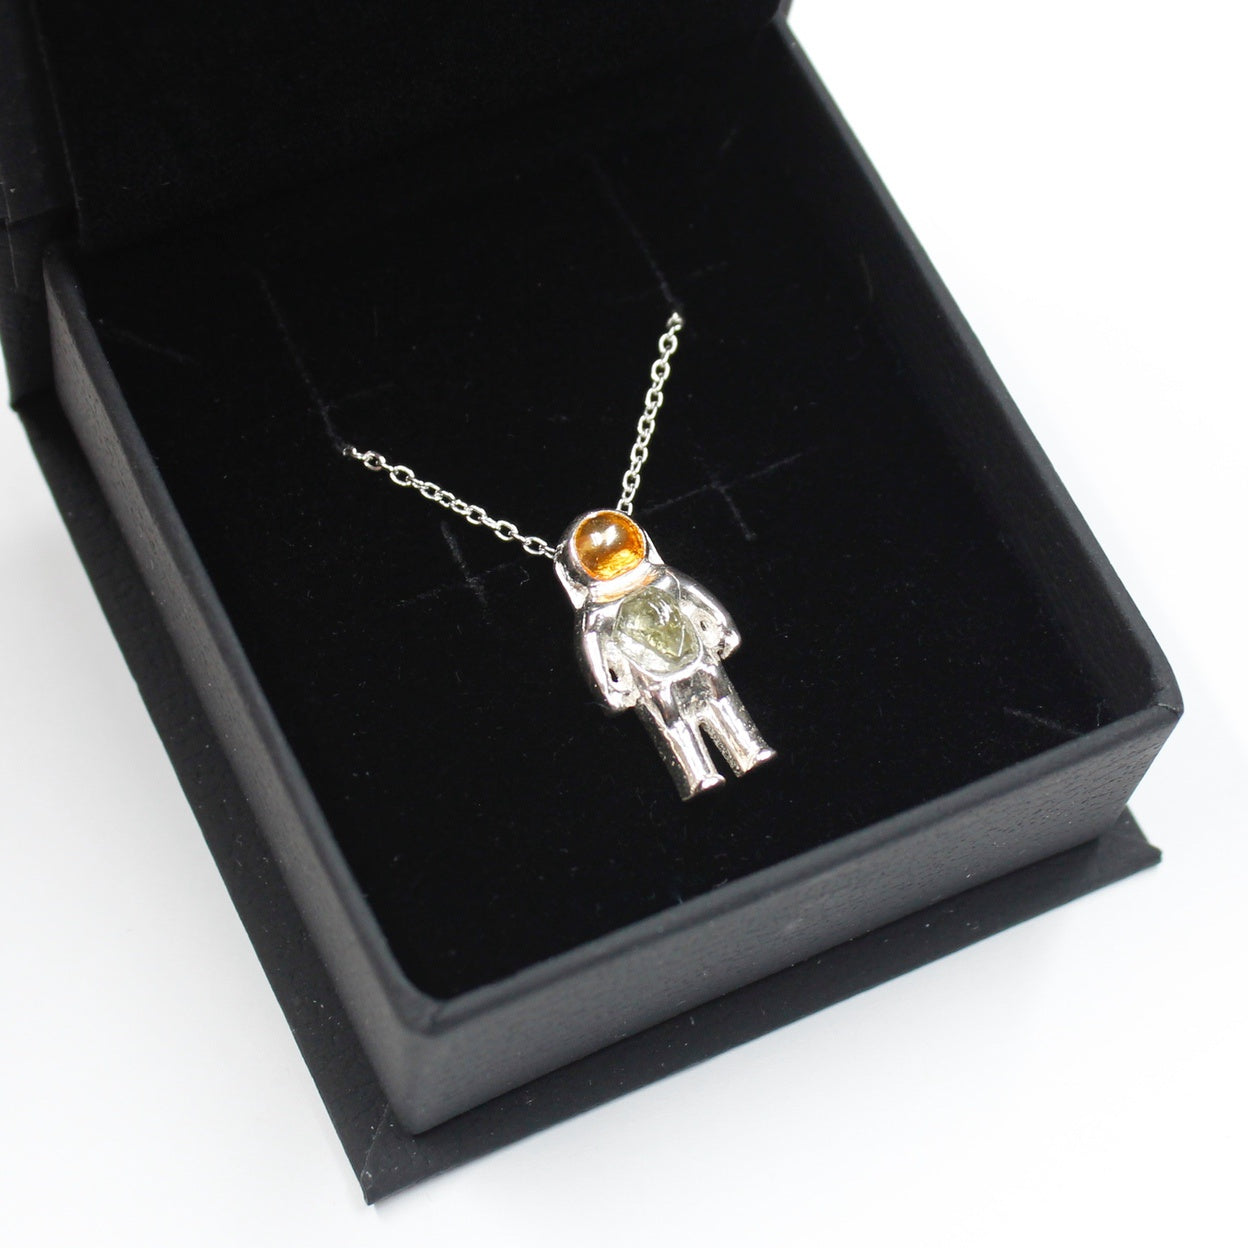 Sterling Silver astronaut pendant necklace with green moldavite glass and gold enamel helmet visor - the perfect space gift! Shown in gift box.